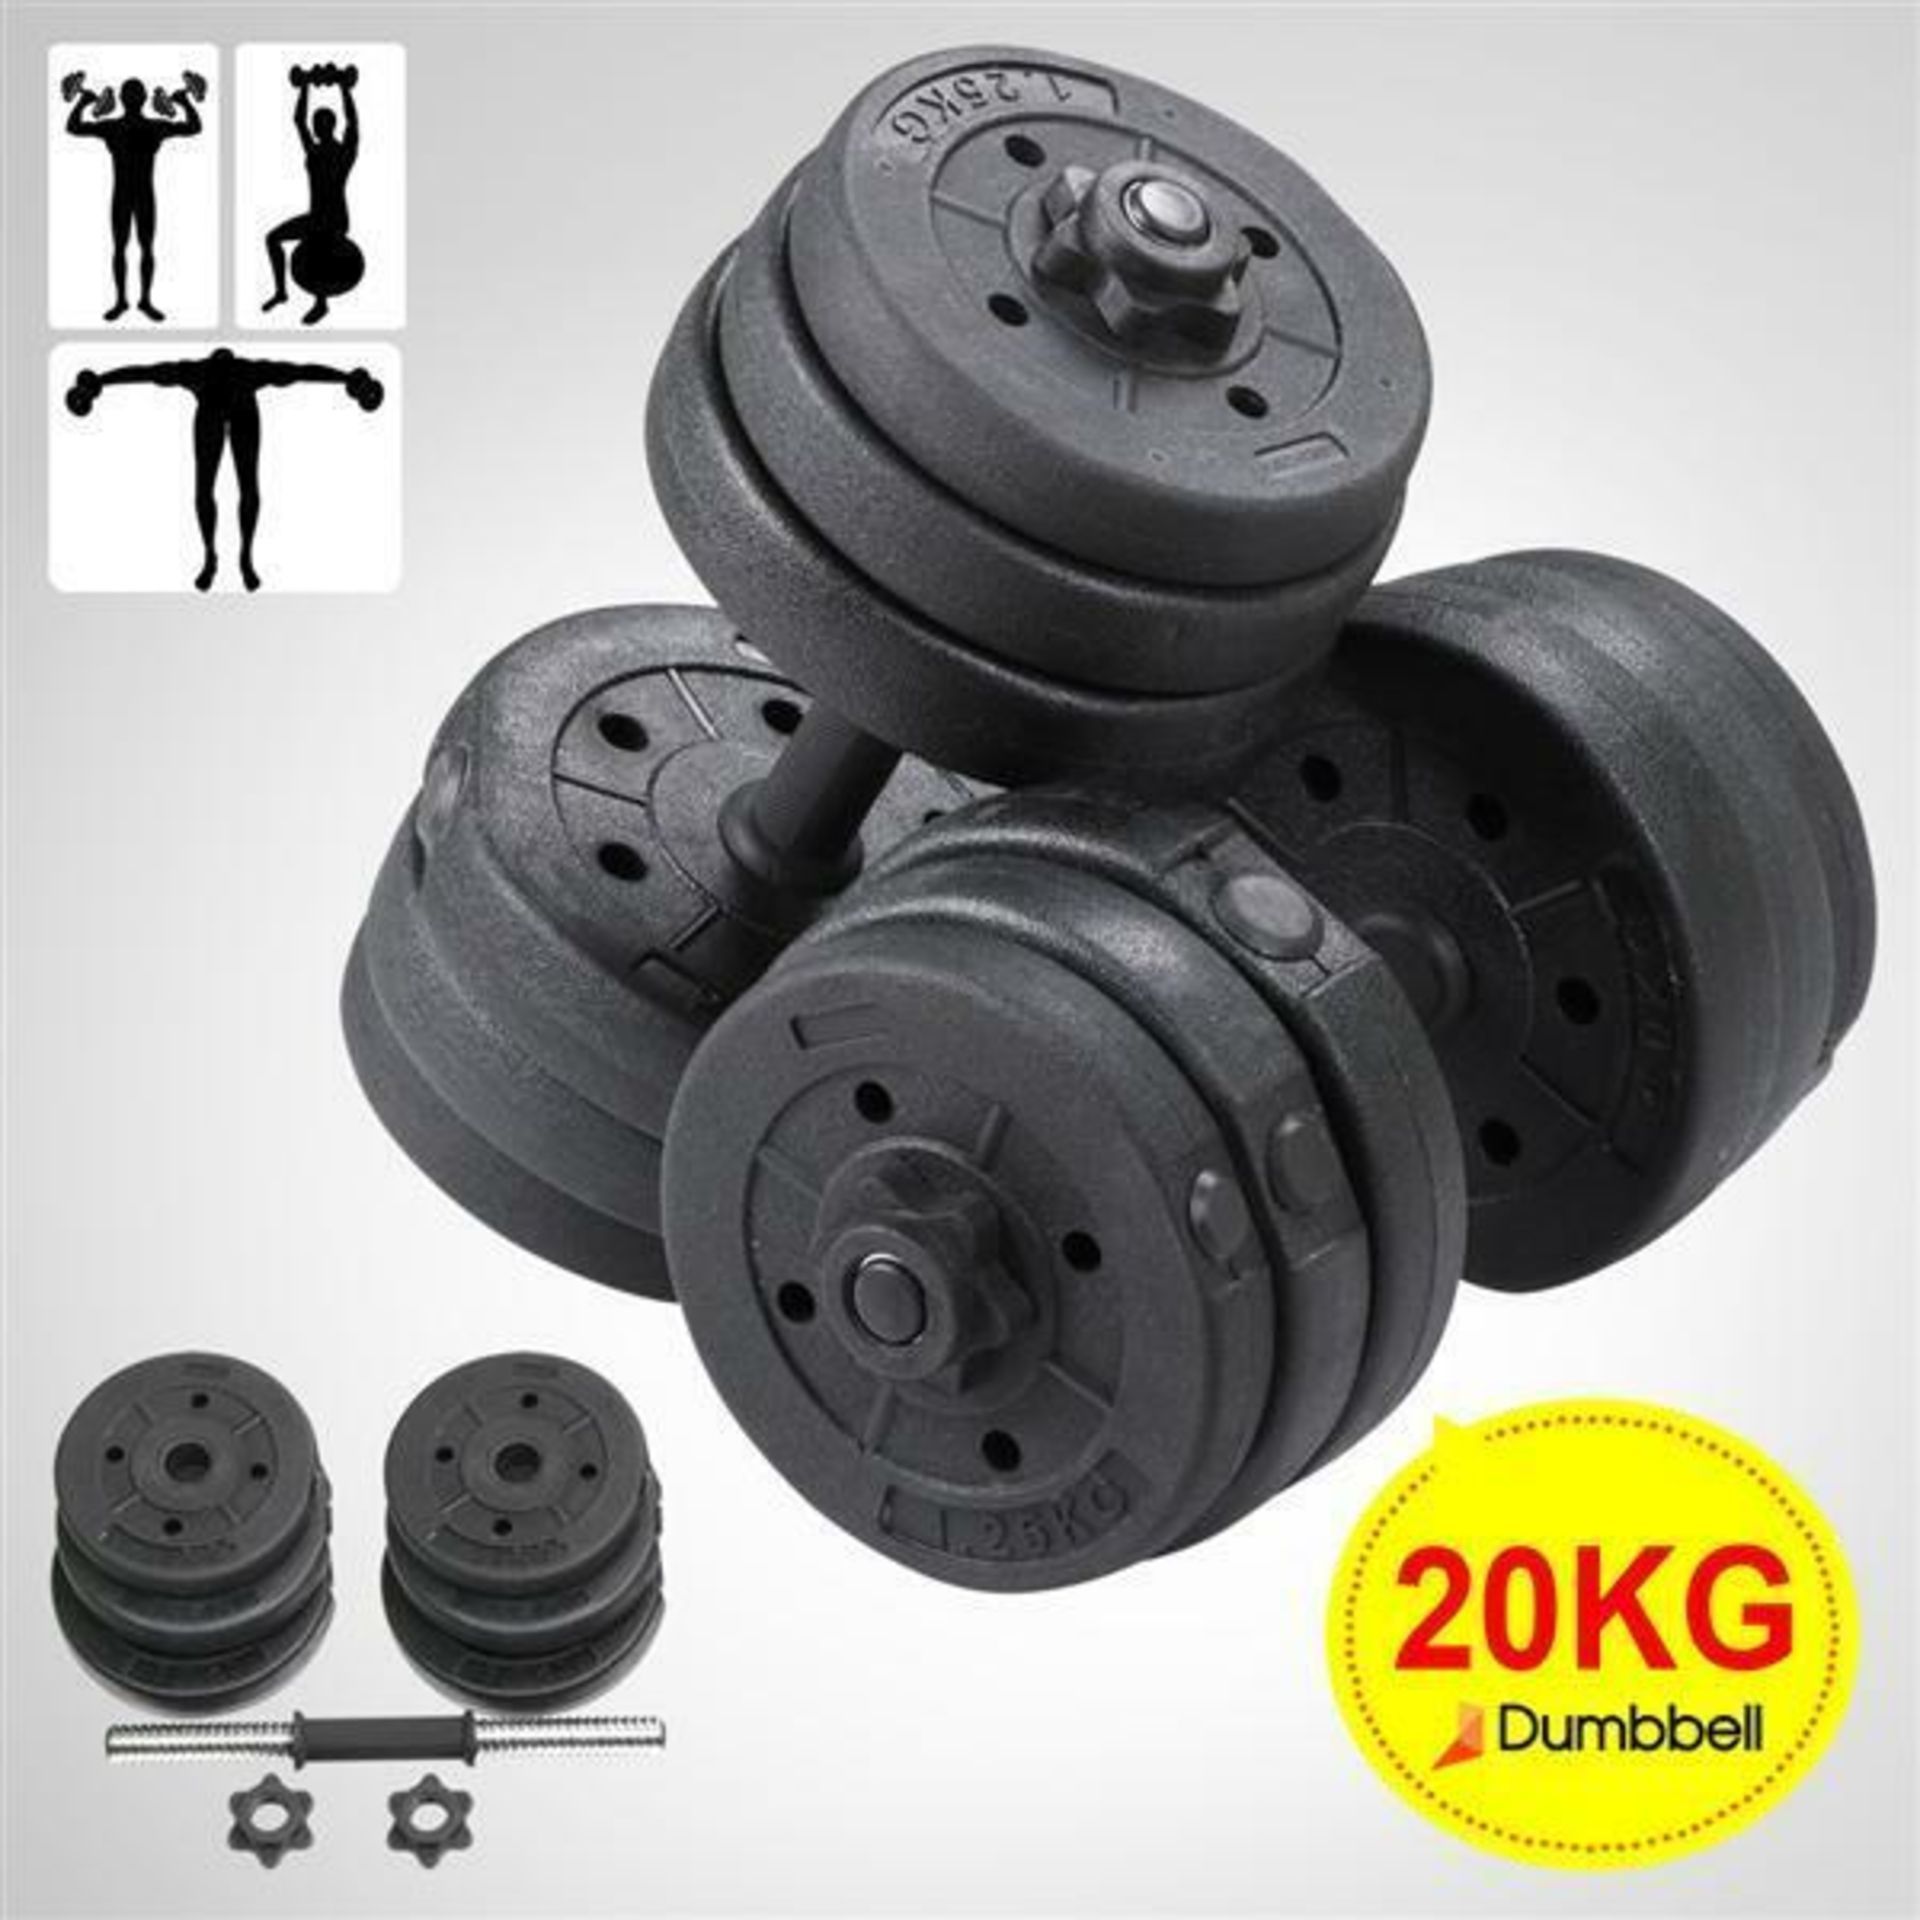 PALLET TO CONTAIN 36 x SETS OF 2 - 20KG ADJUSTABLE WEIGHT DUMBBELL SETS. (PALLET ID: 15) EACH SET